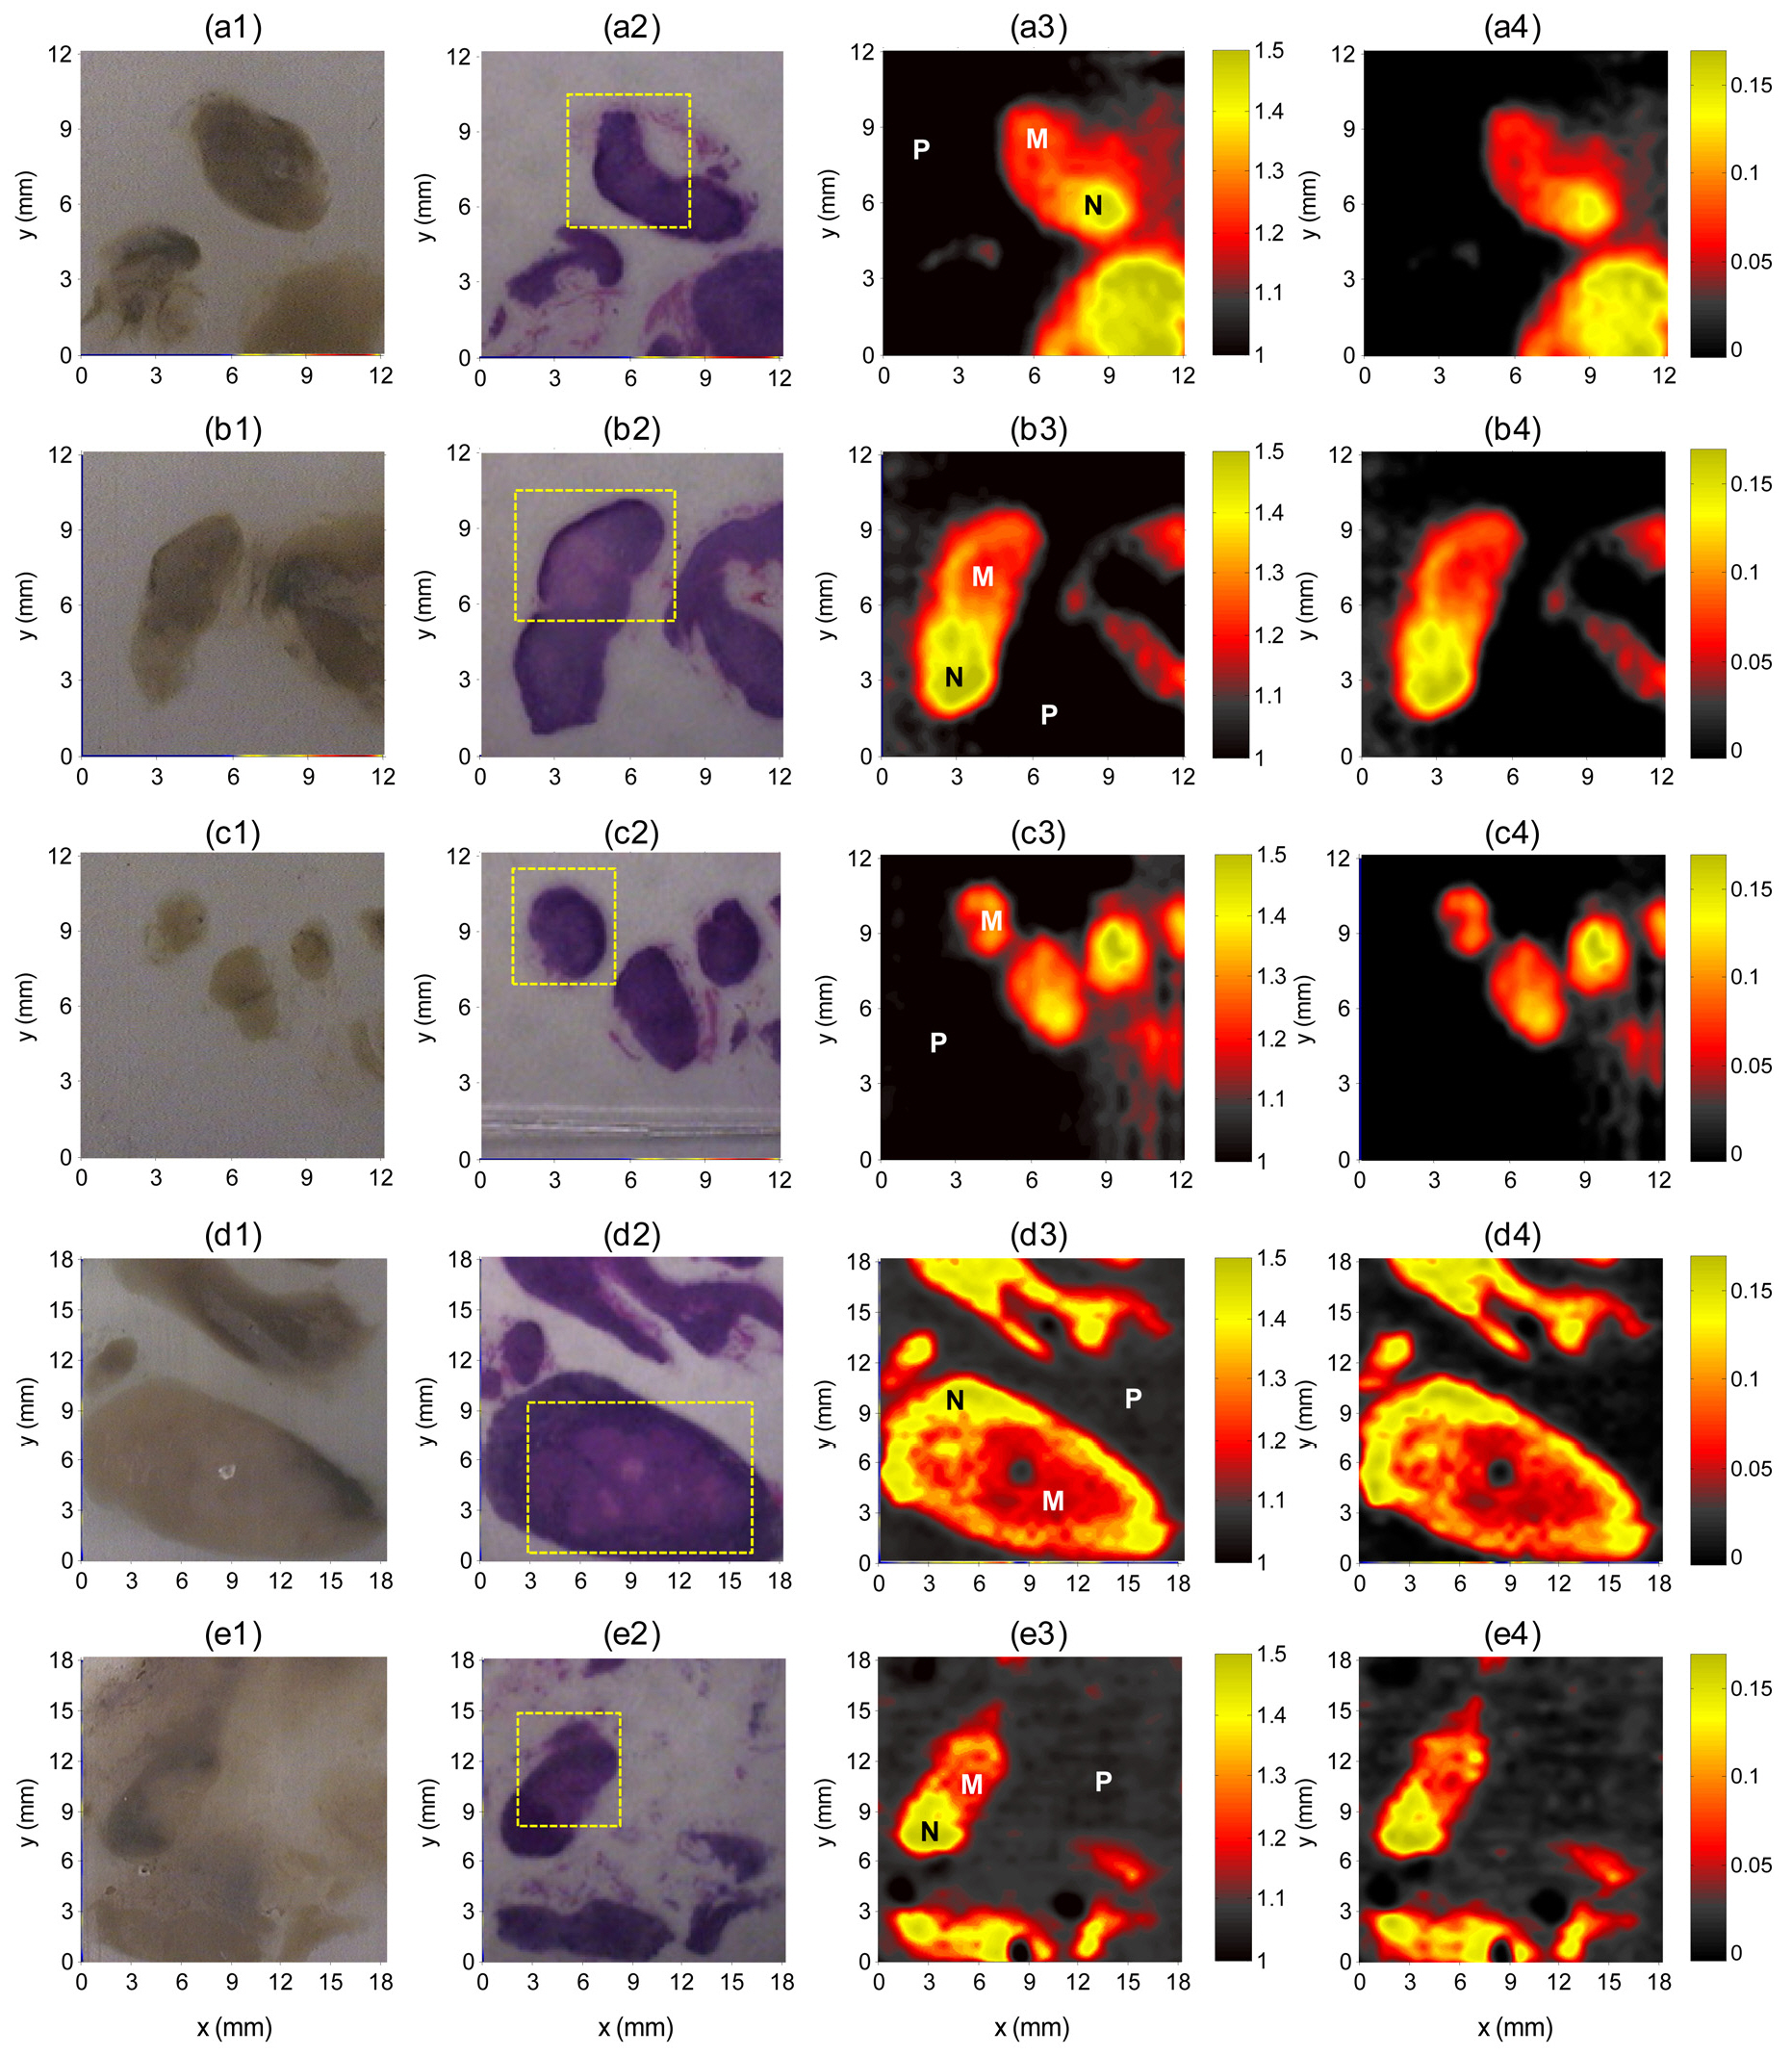 Optical (column 1), histopathologic (column 2), and THz images (columns 3 and 4) of five paraffin-embedded metastaticlymph nodes from two patients. The THz images were obtained using E(x, y)/E0 (column 3) and Δn(x, y, f)/np (column 4). Selectedpixels are indicated in column 3 (P: paraffin, M: metastatic portion, N: non-metastatic portion). The dashed boxes indicate themetastatic portion identified by histopathologic examination. The THz images showed good correlations with histopathologic results.